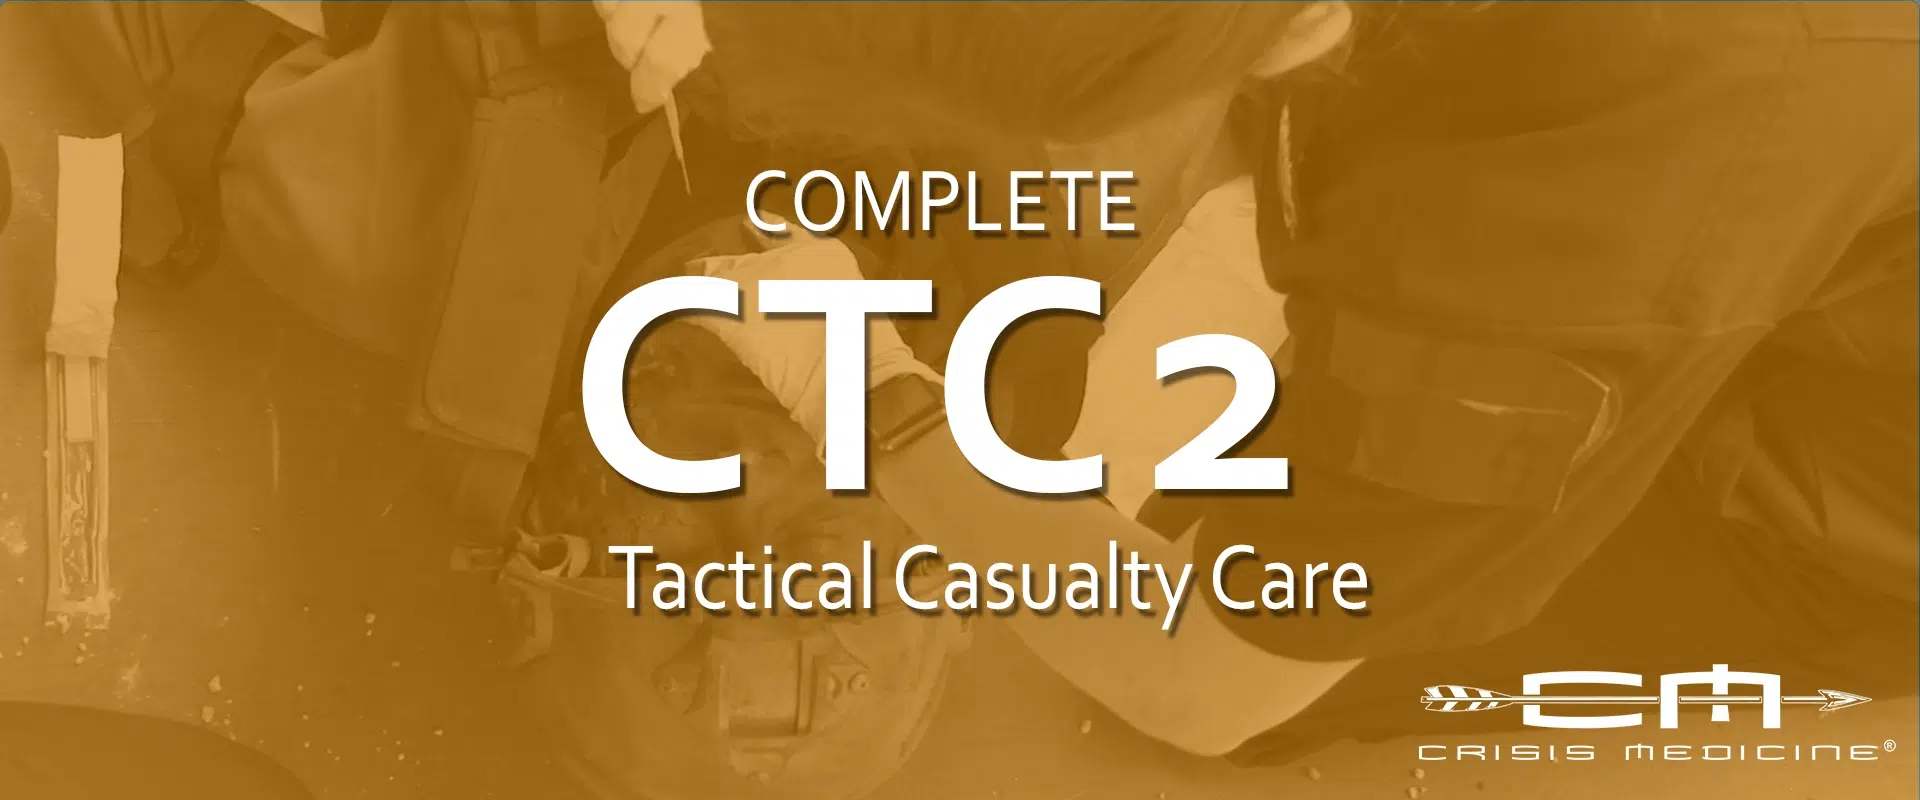 Crisis Medicine Complete Tactical Casualty Care